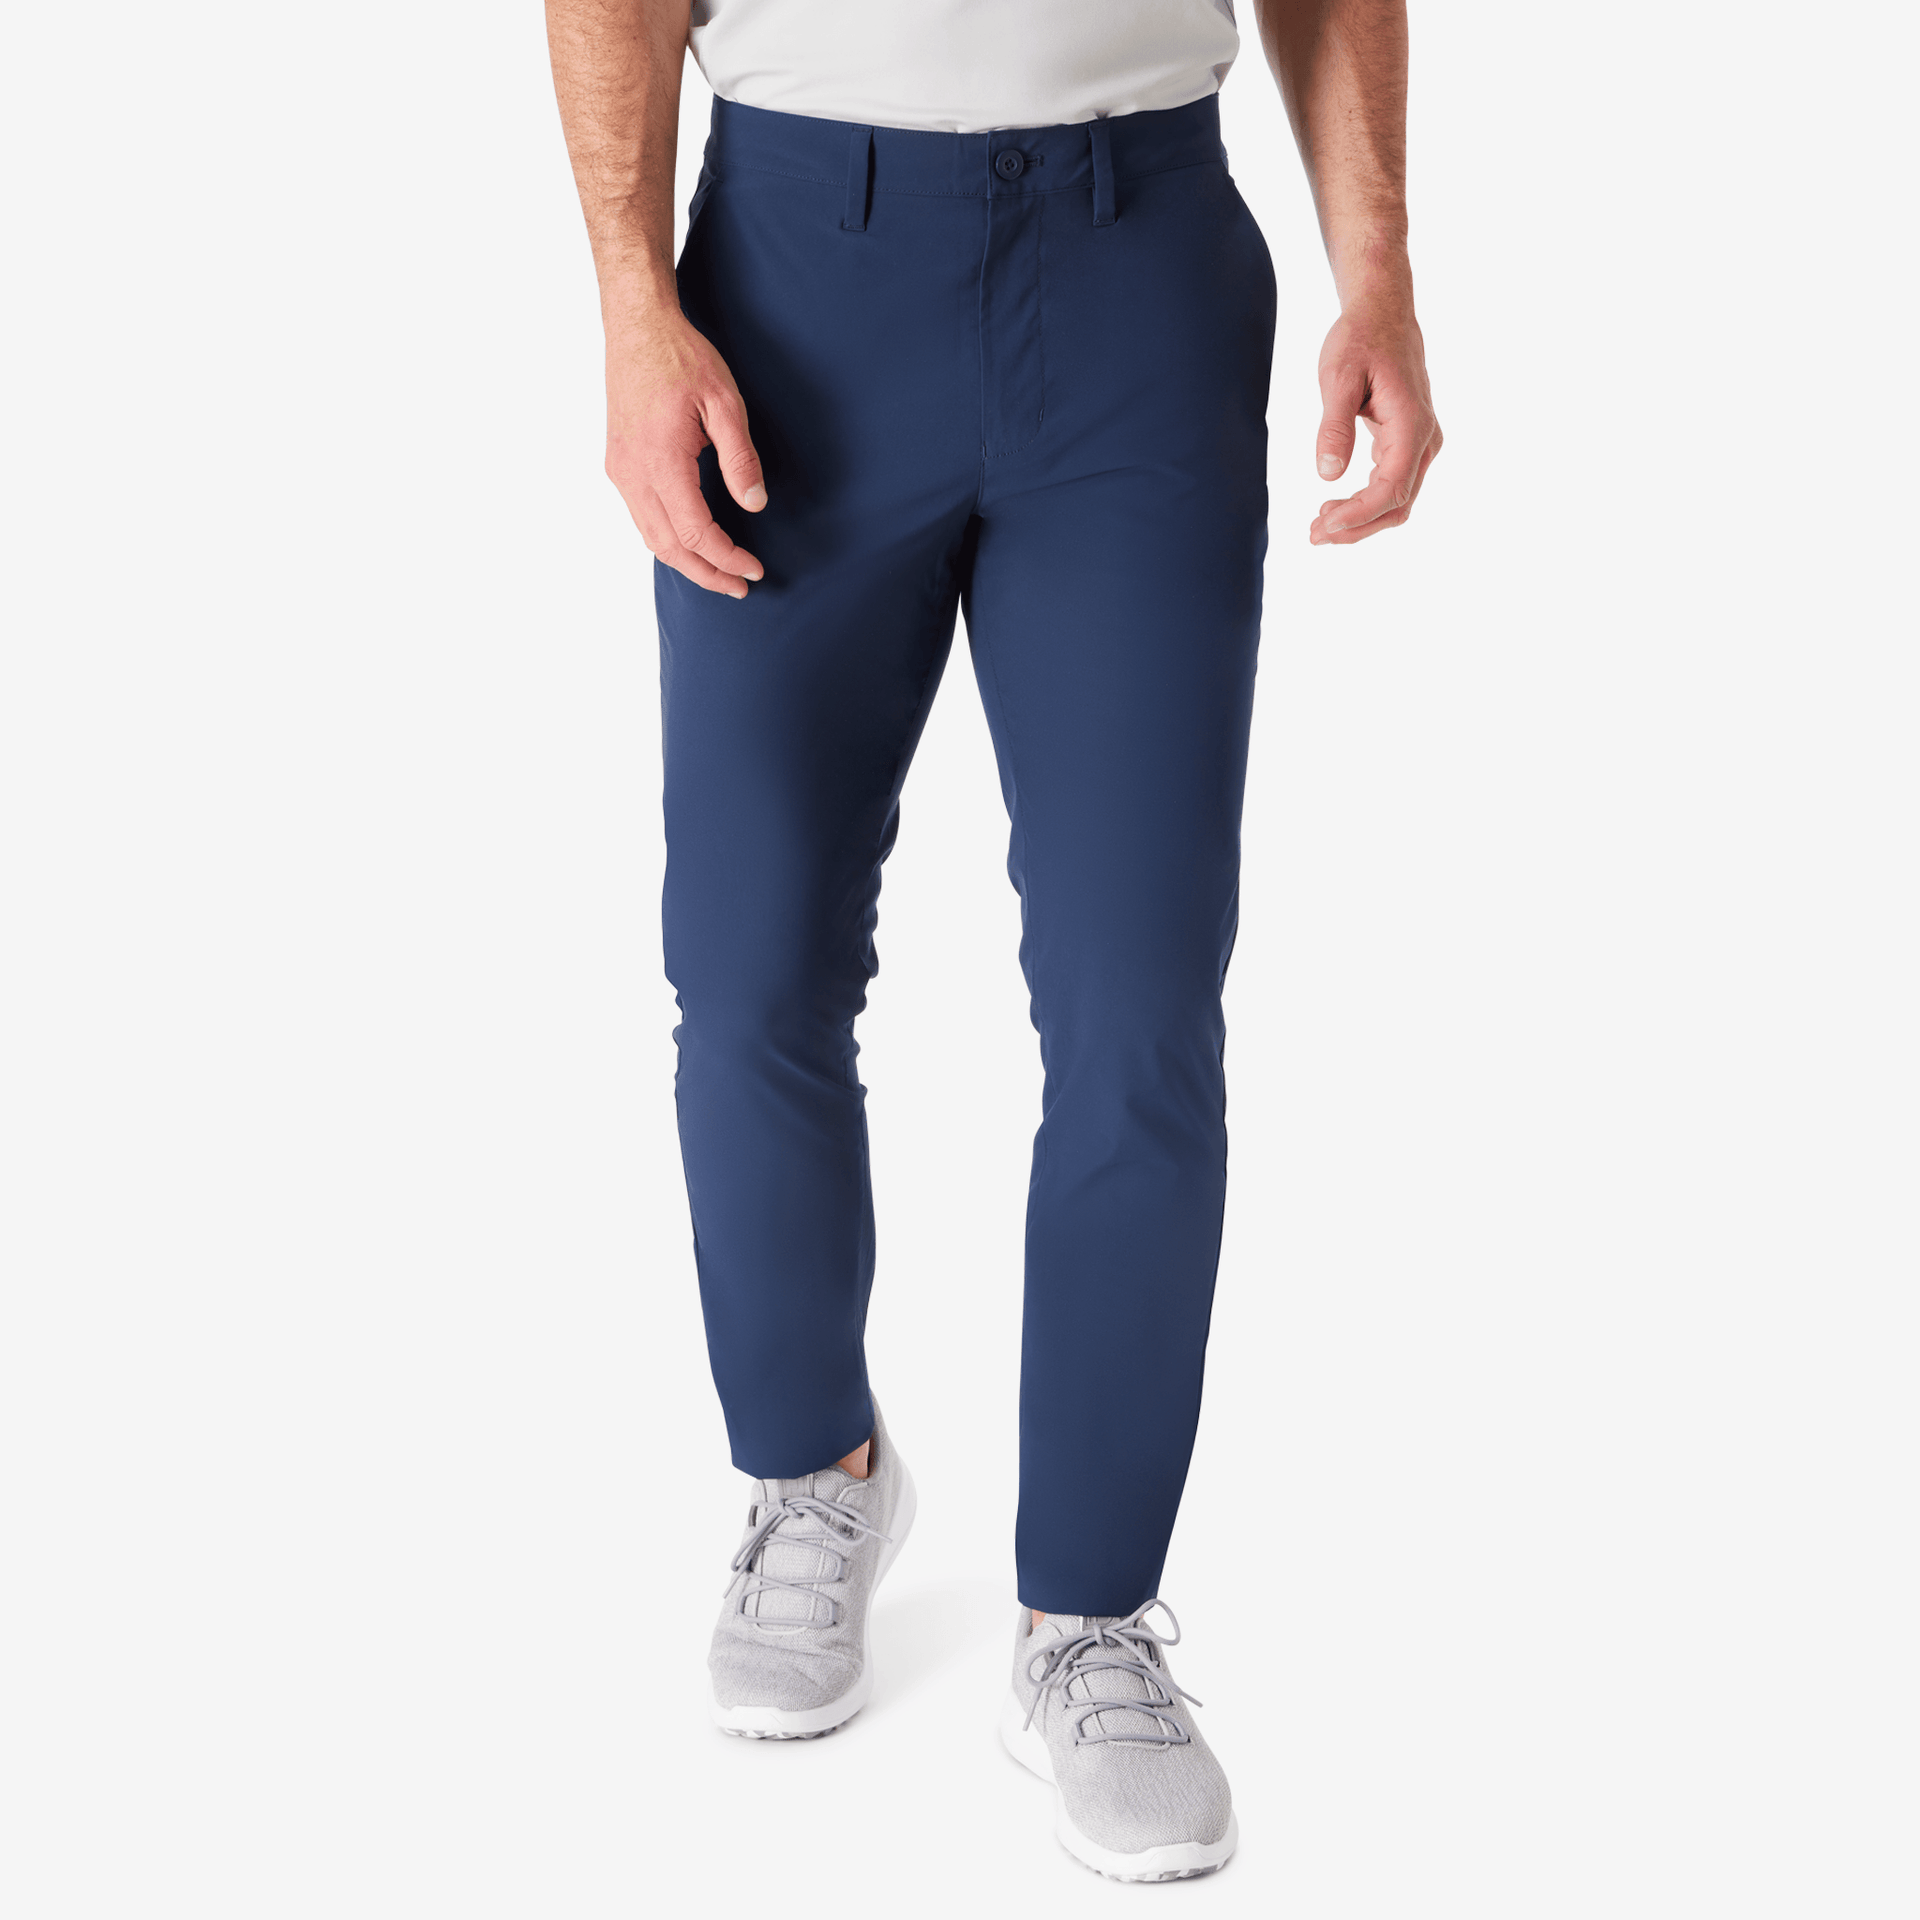 Mens All in Motion Lightweight Run Pants Navy XL for sale online 